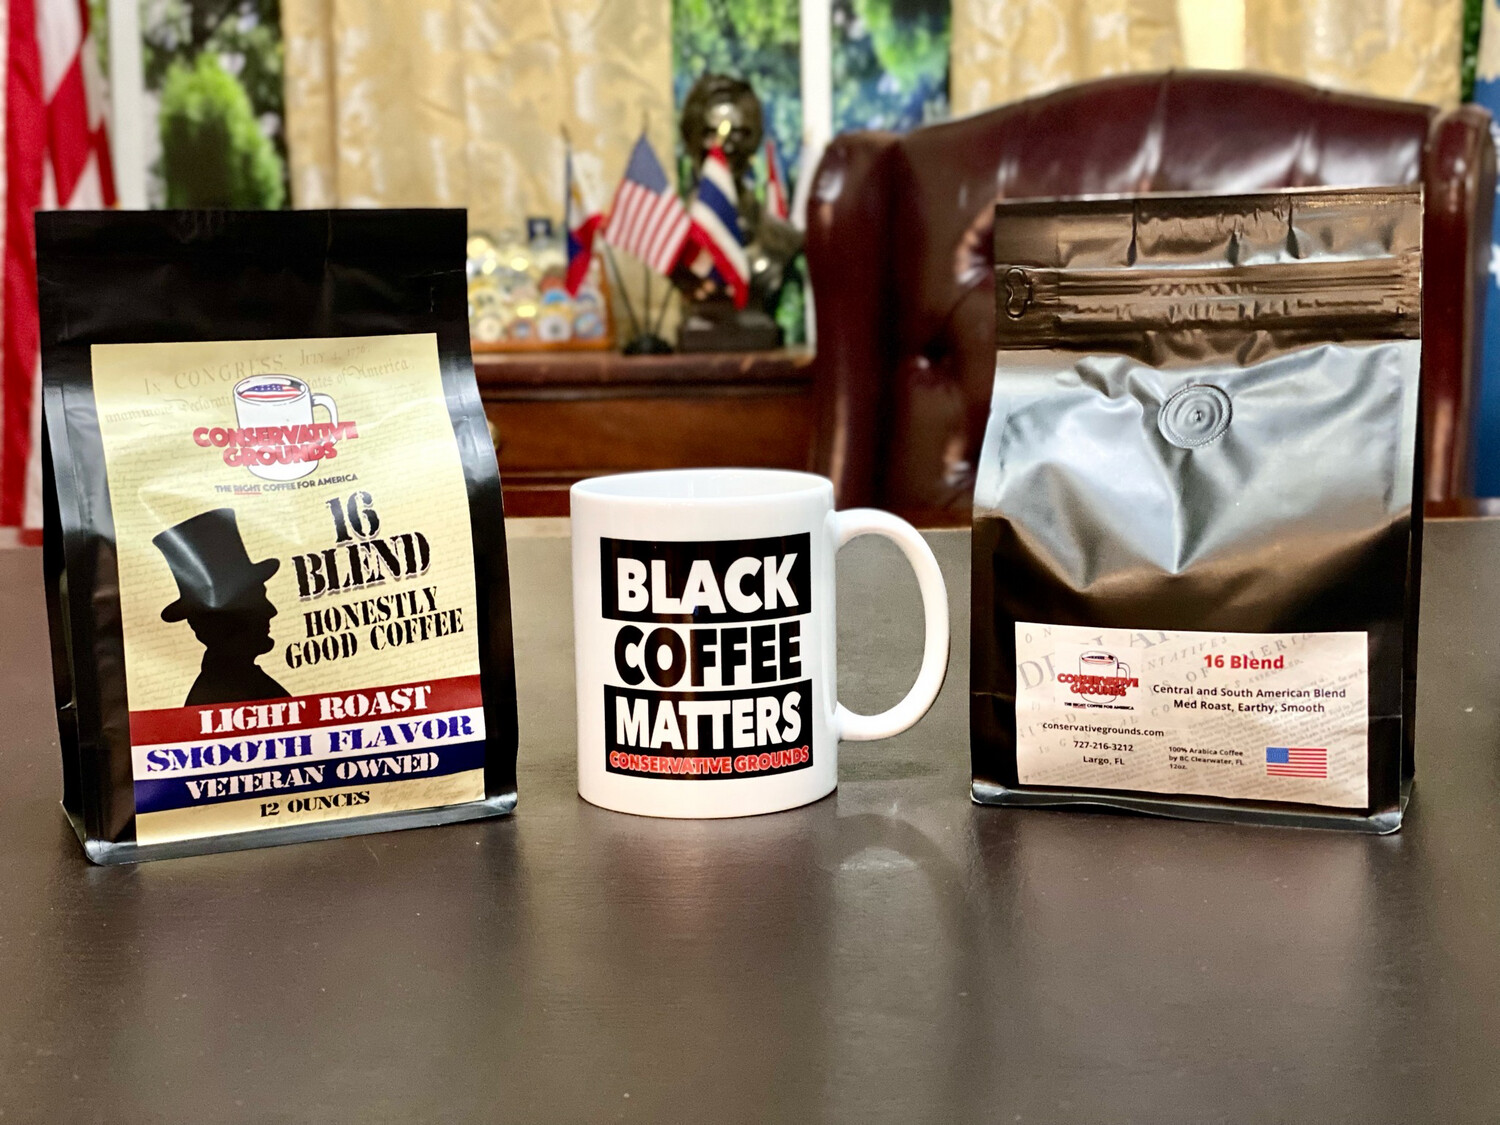 16 Blend And Black Coffee Matters Bundle